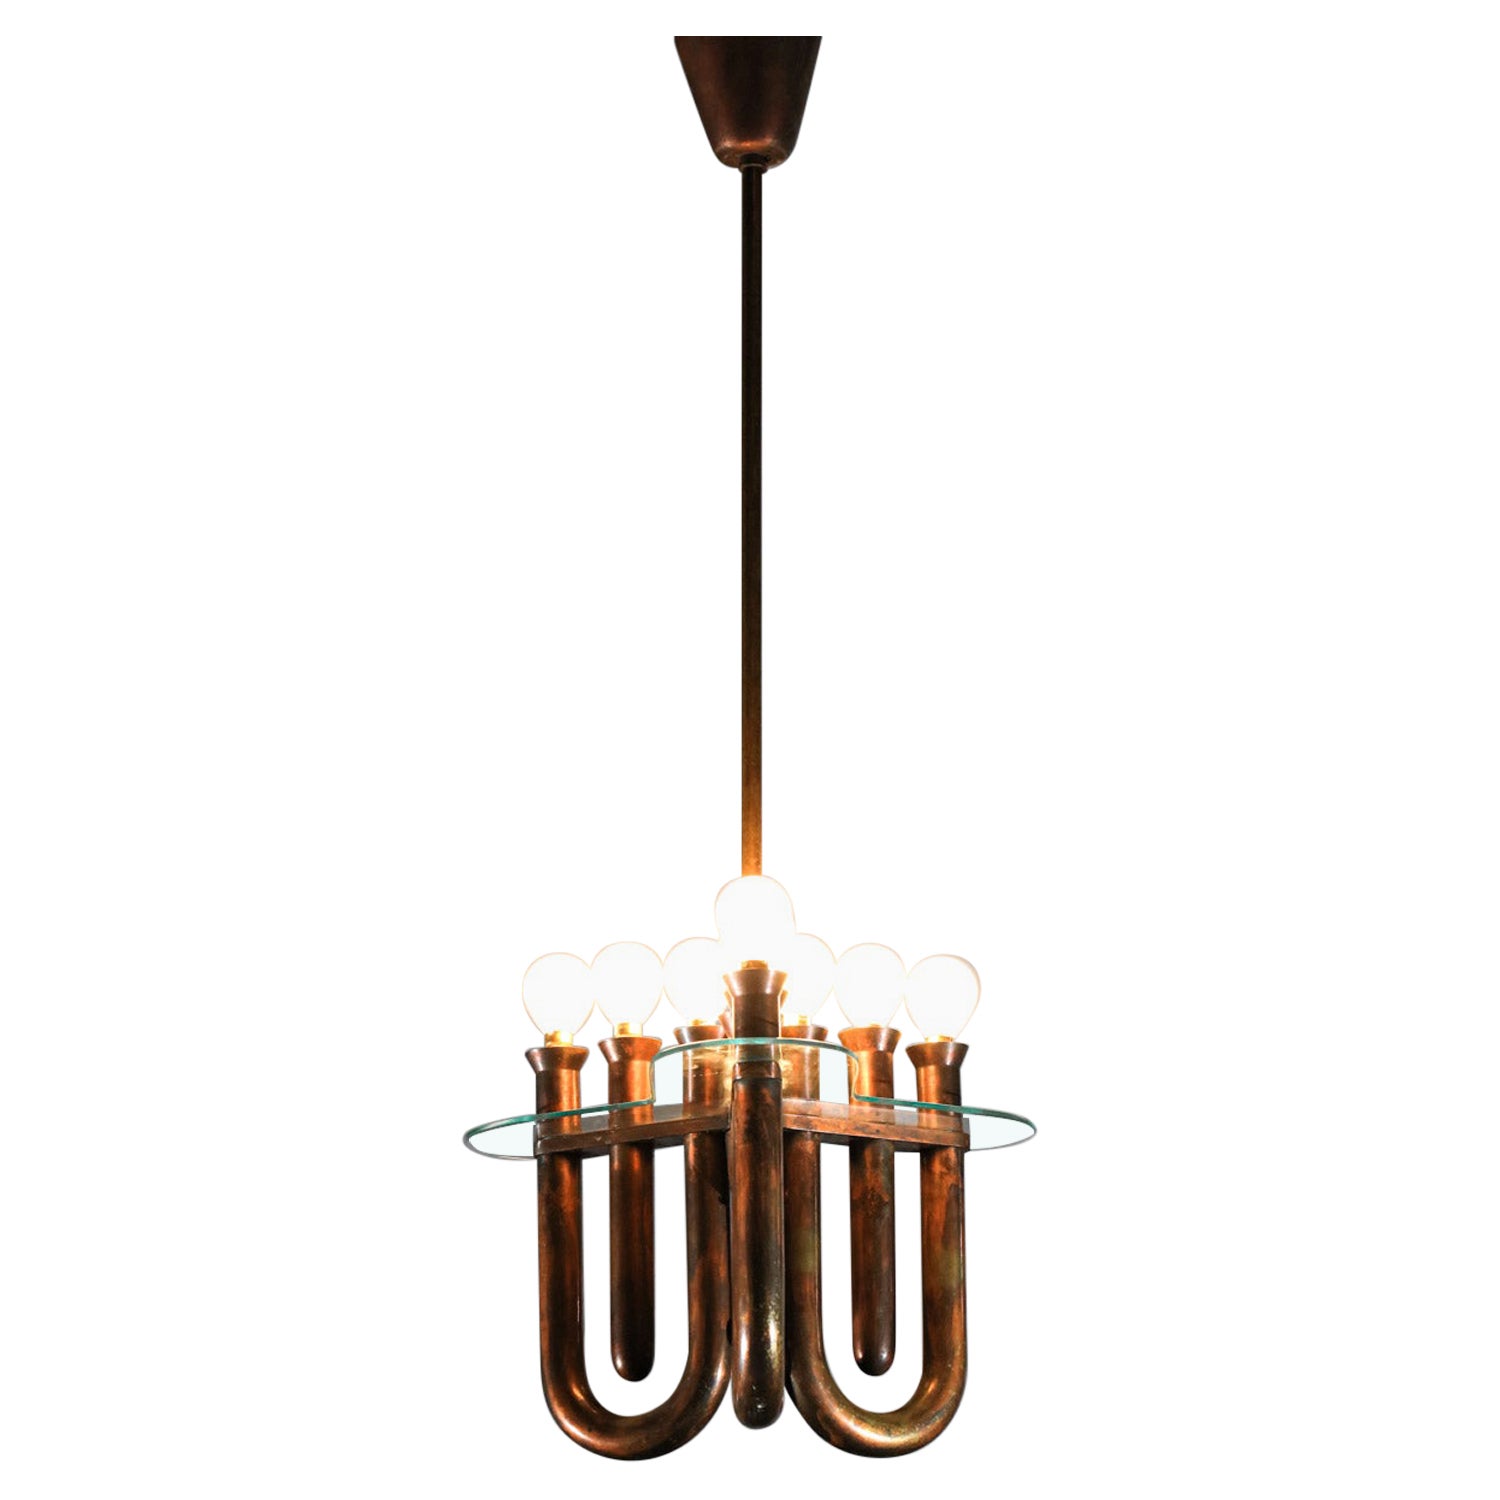 Italian hanging lamp in bent copper tubes from the 50's